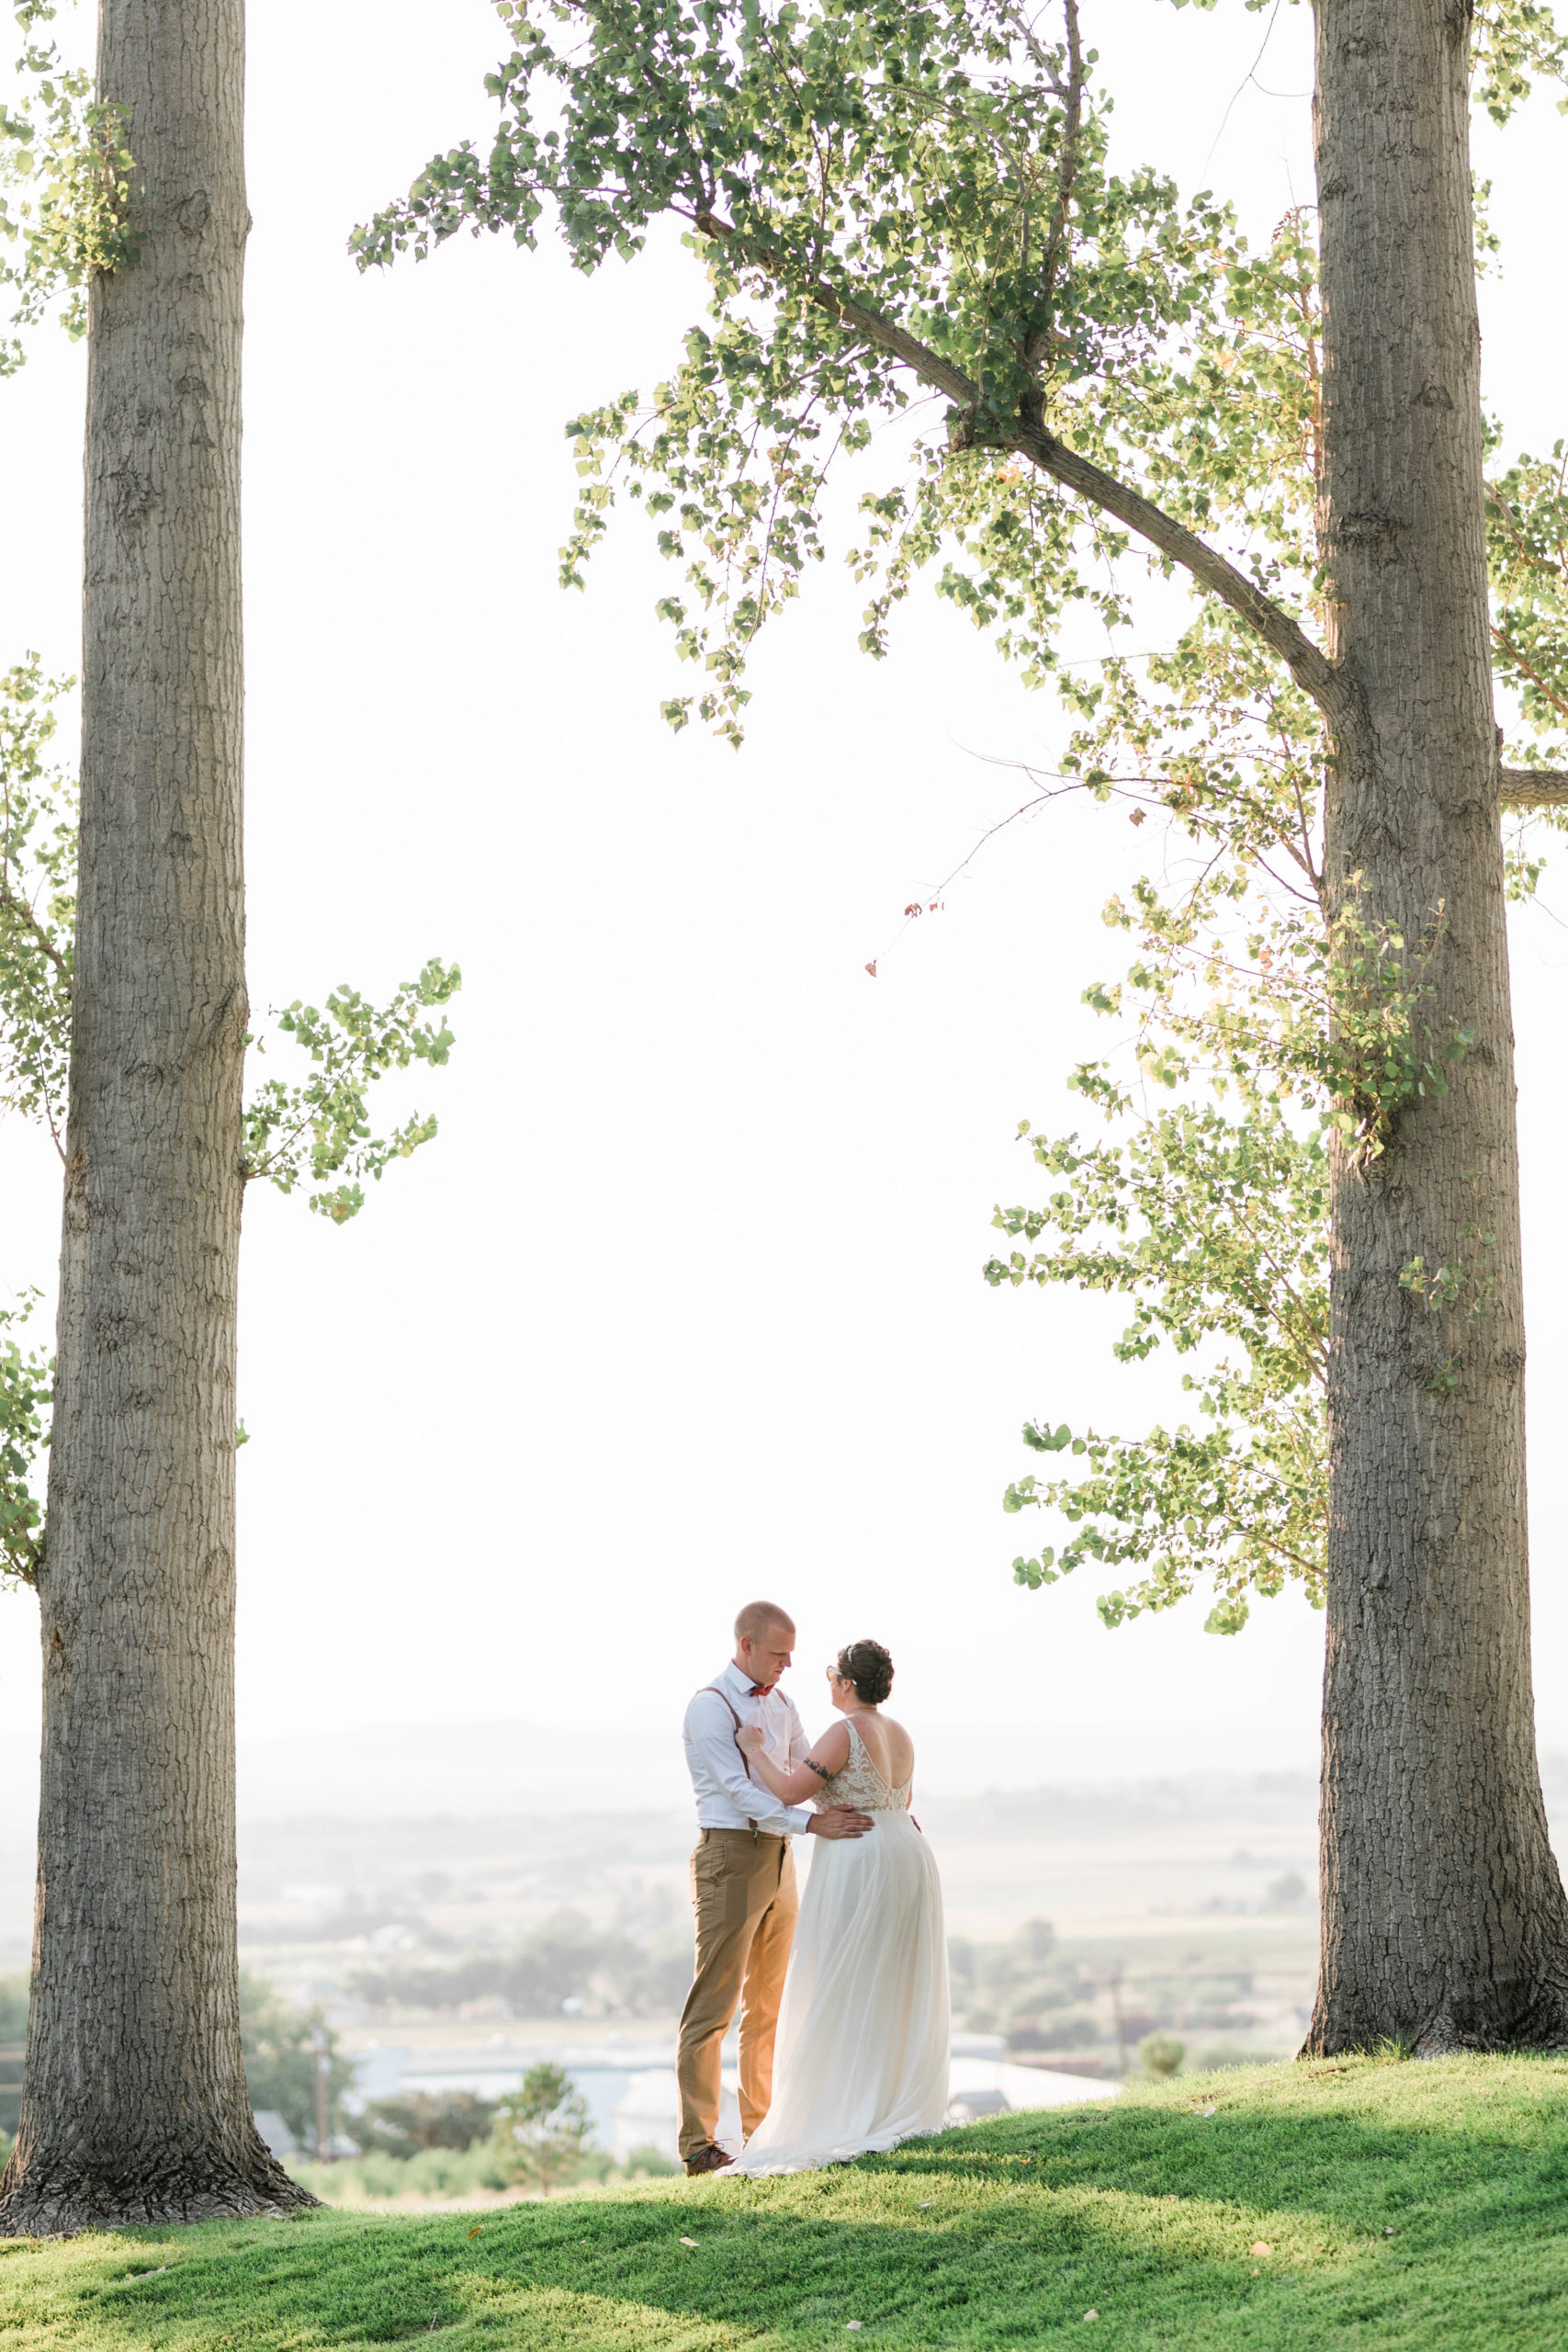 Boise wedding with bride and groom standing on a hill looking out over a valley through tall trees